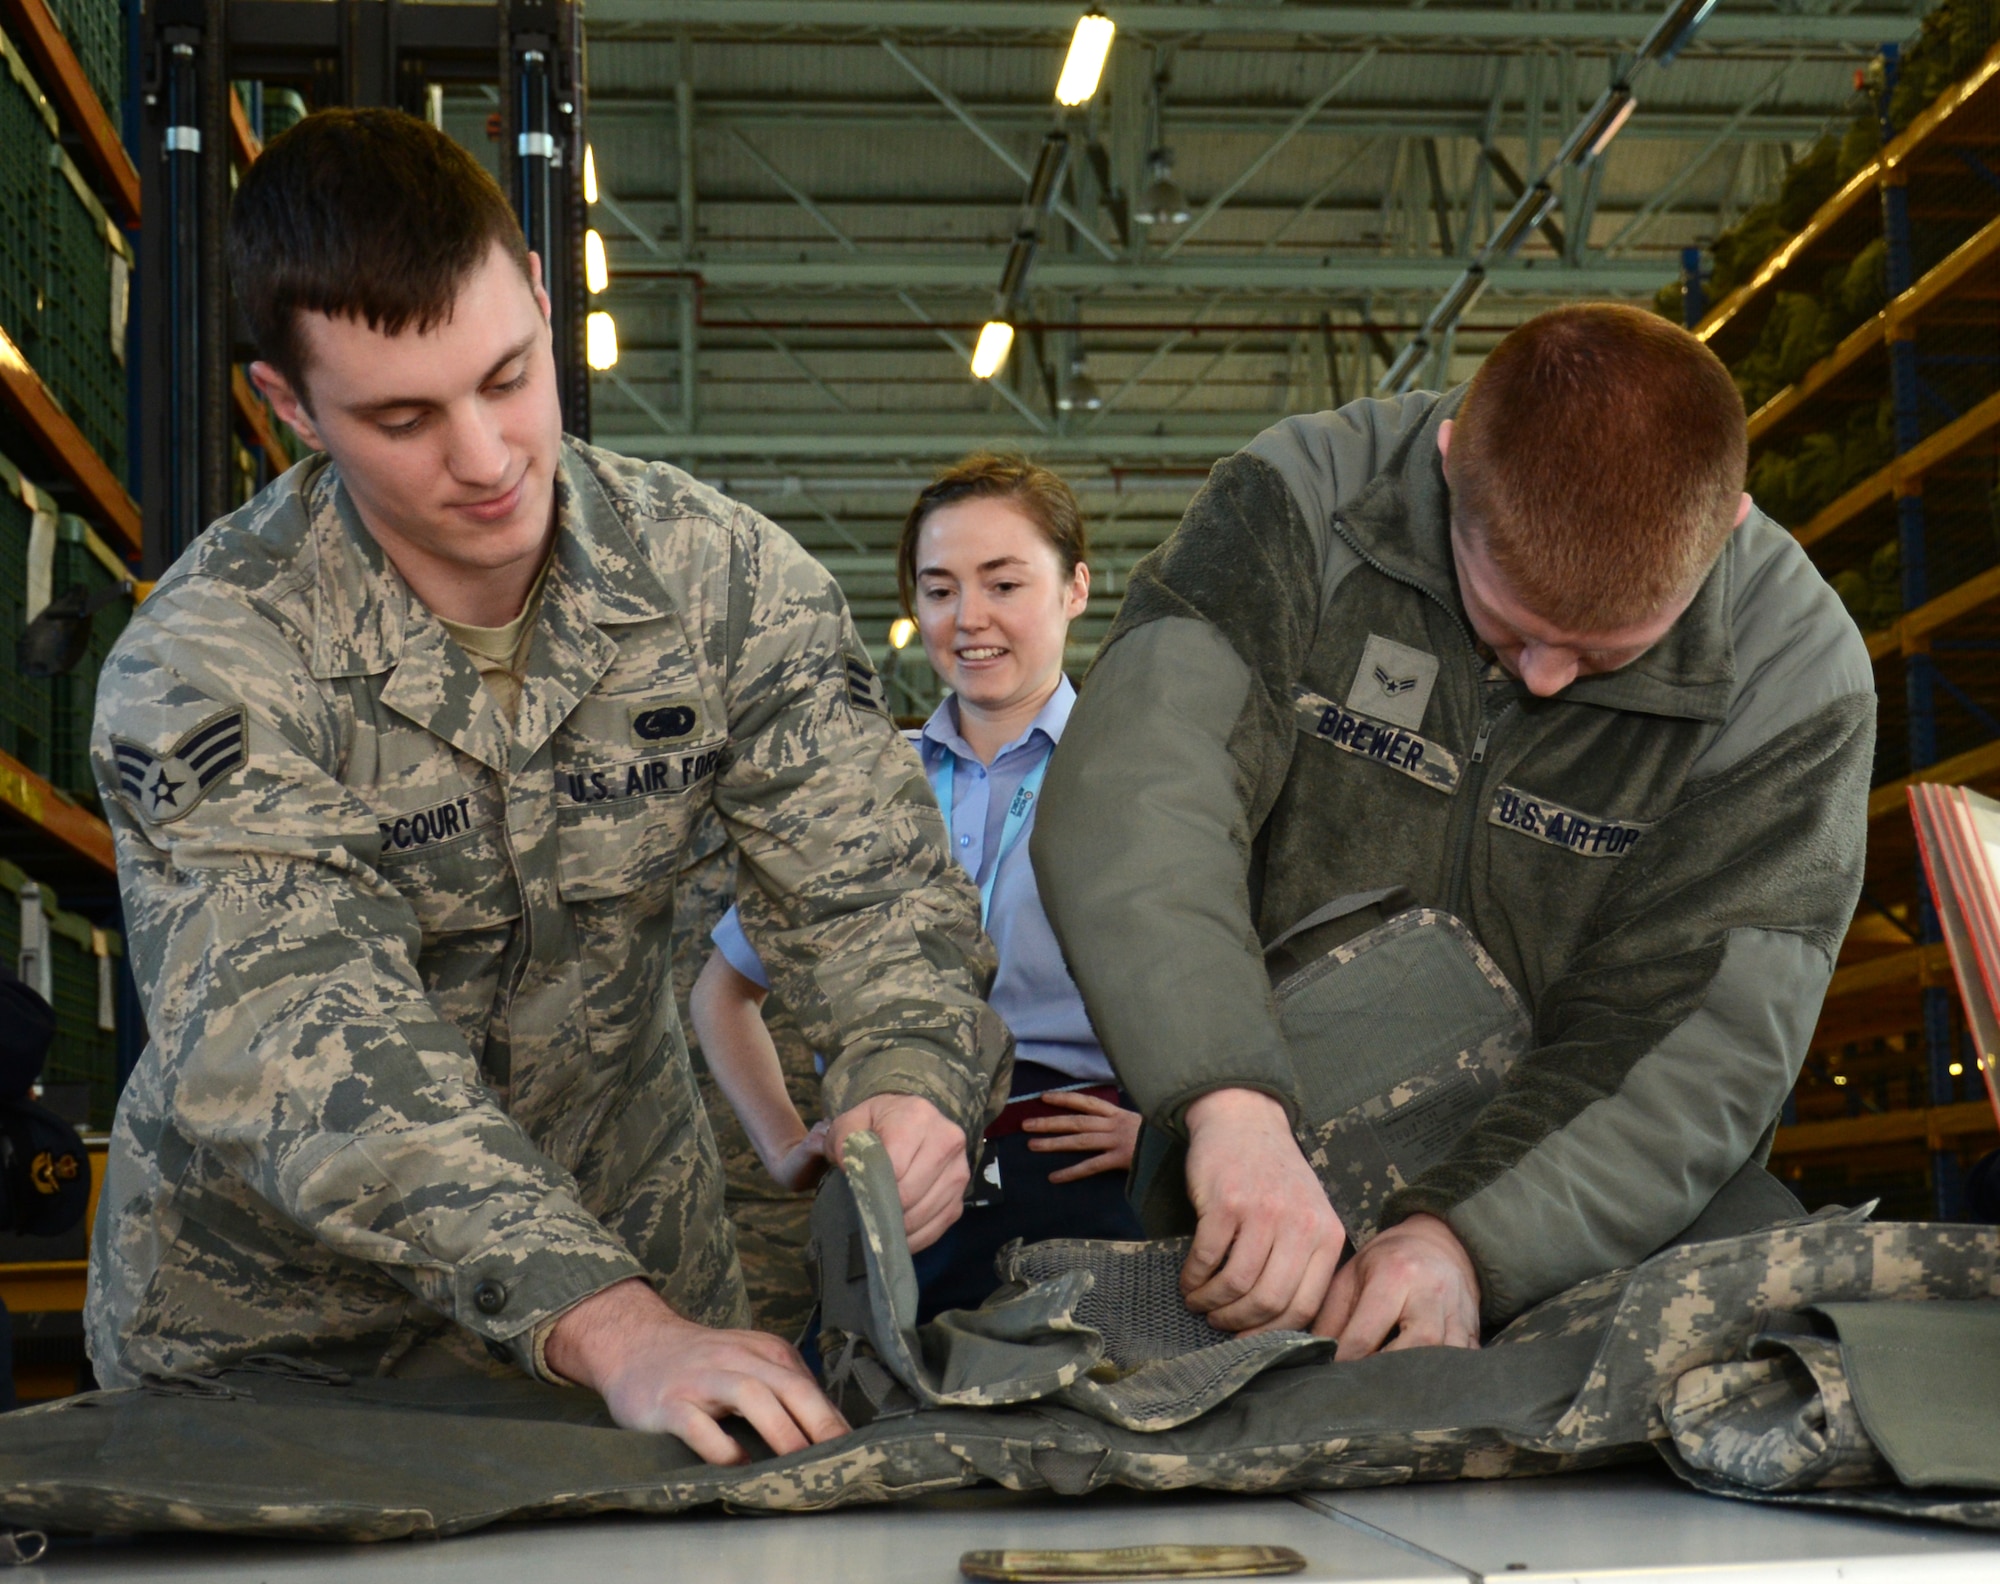 U.S. Air Force Senior Airman Landon McCourt, left, 100th Logistics Readiness Squadron Individual Protective Equipment journeyman from Temecula, Calif., and U.S. Air Force Airman 1st Class James Brewer, right, 100th LRS IPE mobility apprentice from Shawnee, Okla., prepare an improved outer tactical vest before Flying Officer Miranda Cope, center, tries it on Feb. 24, 2015, on RAF Mildenhall, England. Royal Air Force Logistics officers visited with members of the 100th LRS during a site tour to further improve relations between the two nations. (U.S. Air Force photo by Gina Randall/Released)